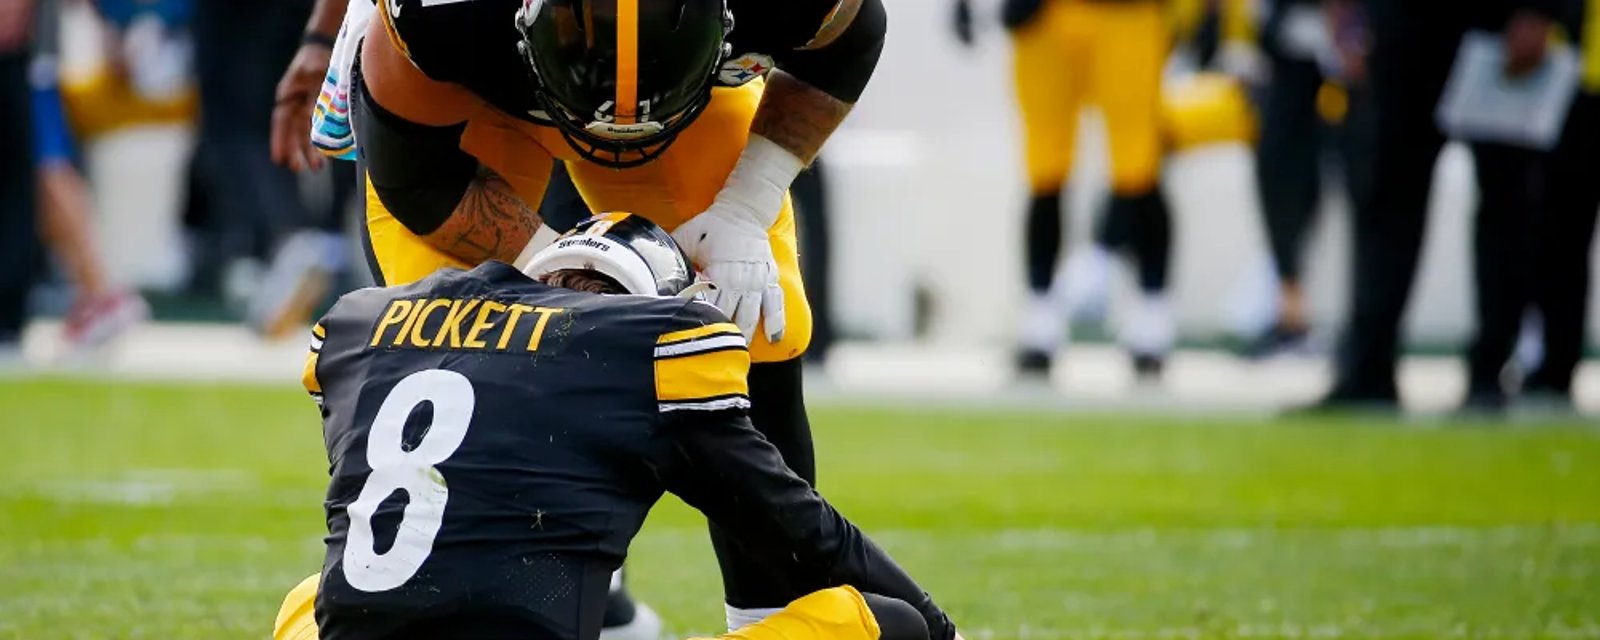 Awful update released on Steelers QB Kenny Pickett